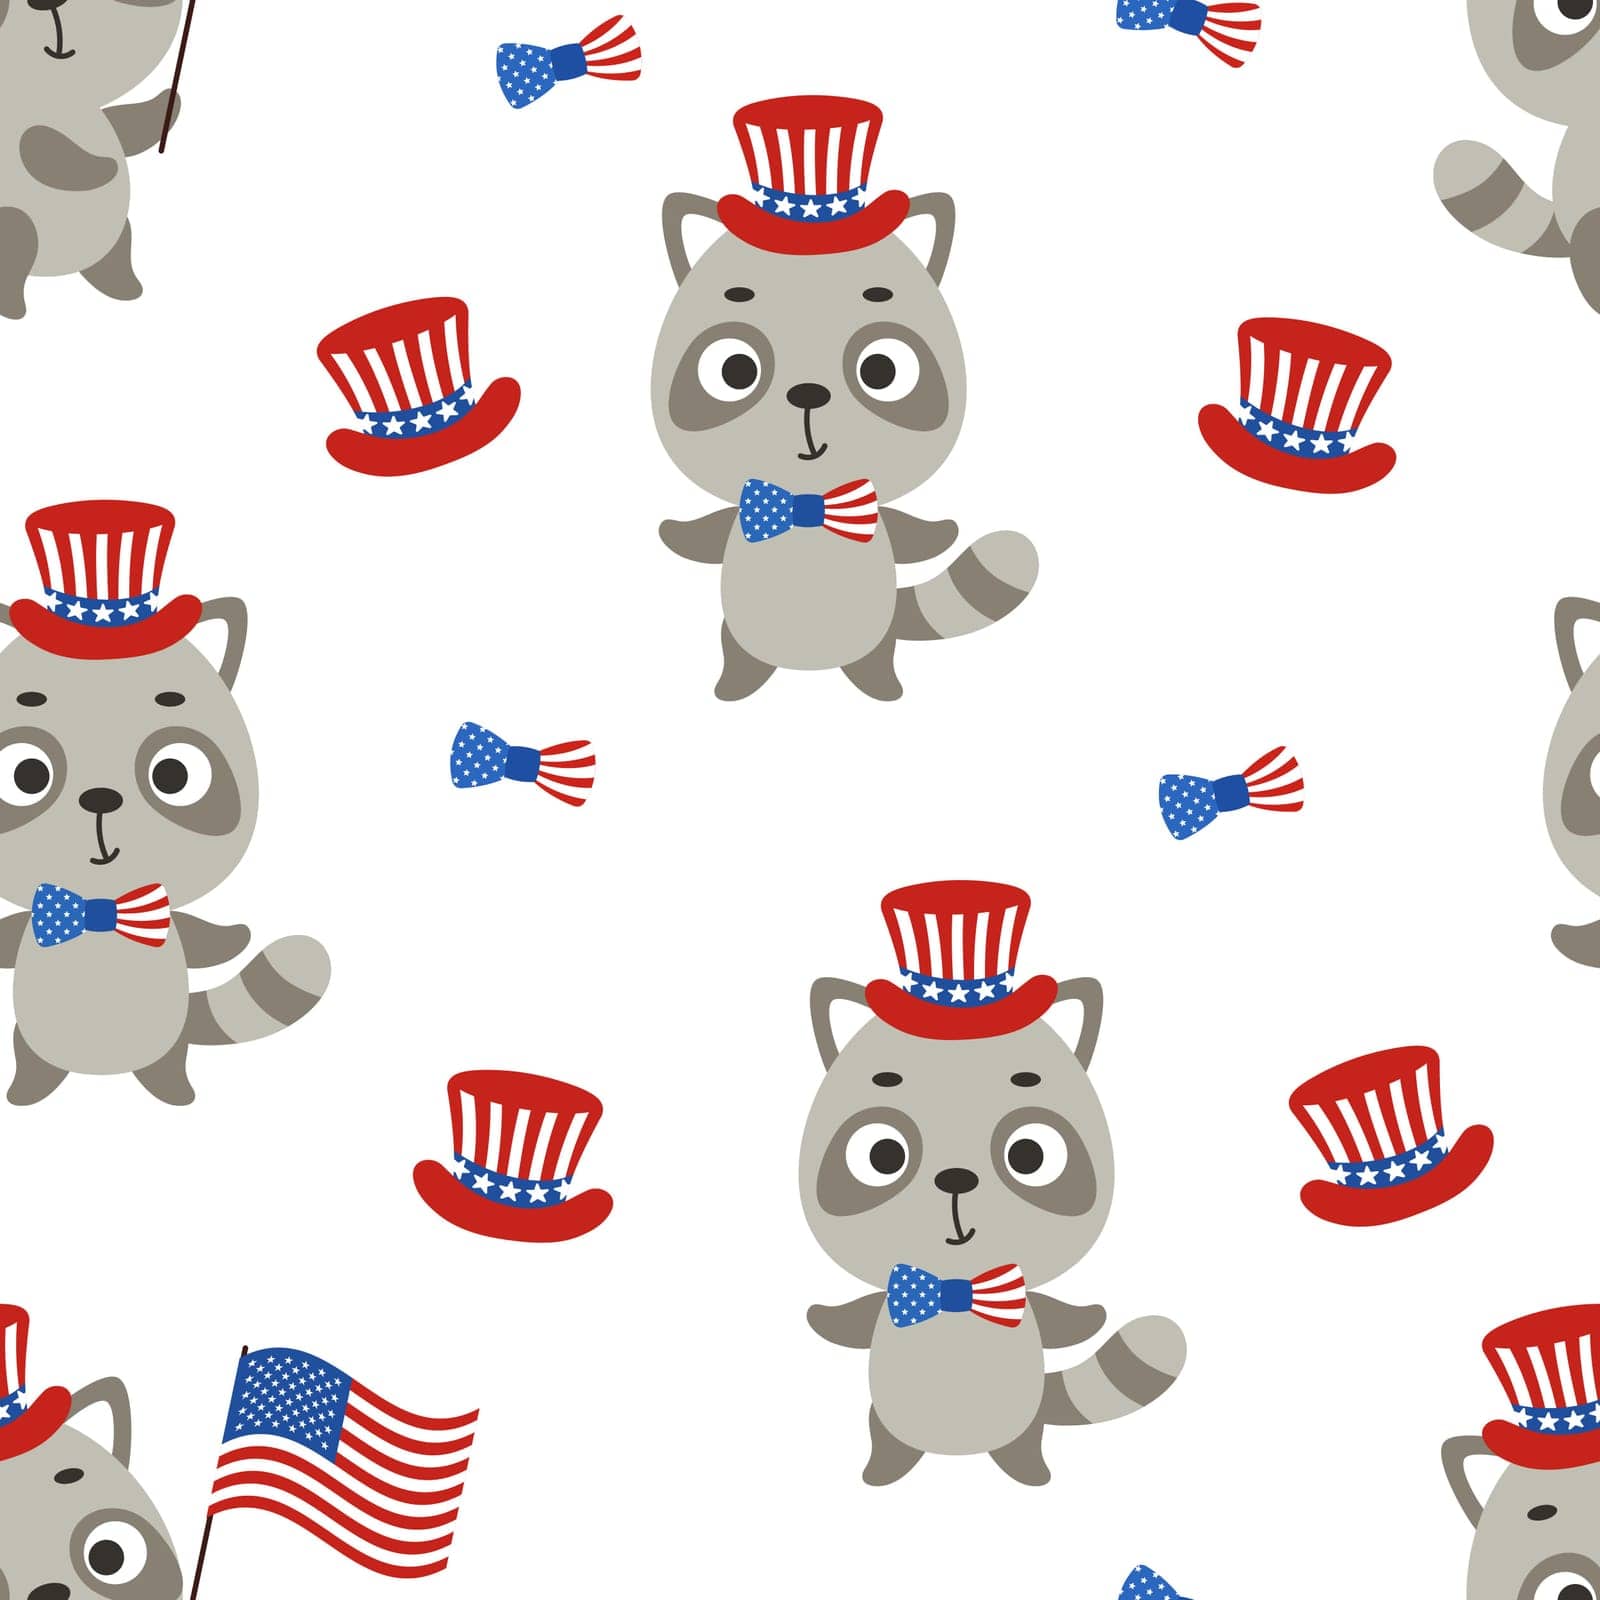 Cute little raccoon in USA patriotic hat seamless childish pattern. Funny cartoon animal character for fabric, wrapping, textile, wallpaper, apparel. Vector illustration